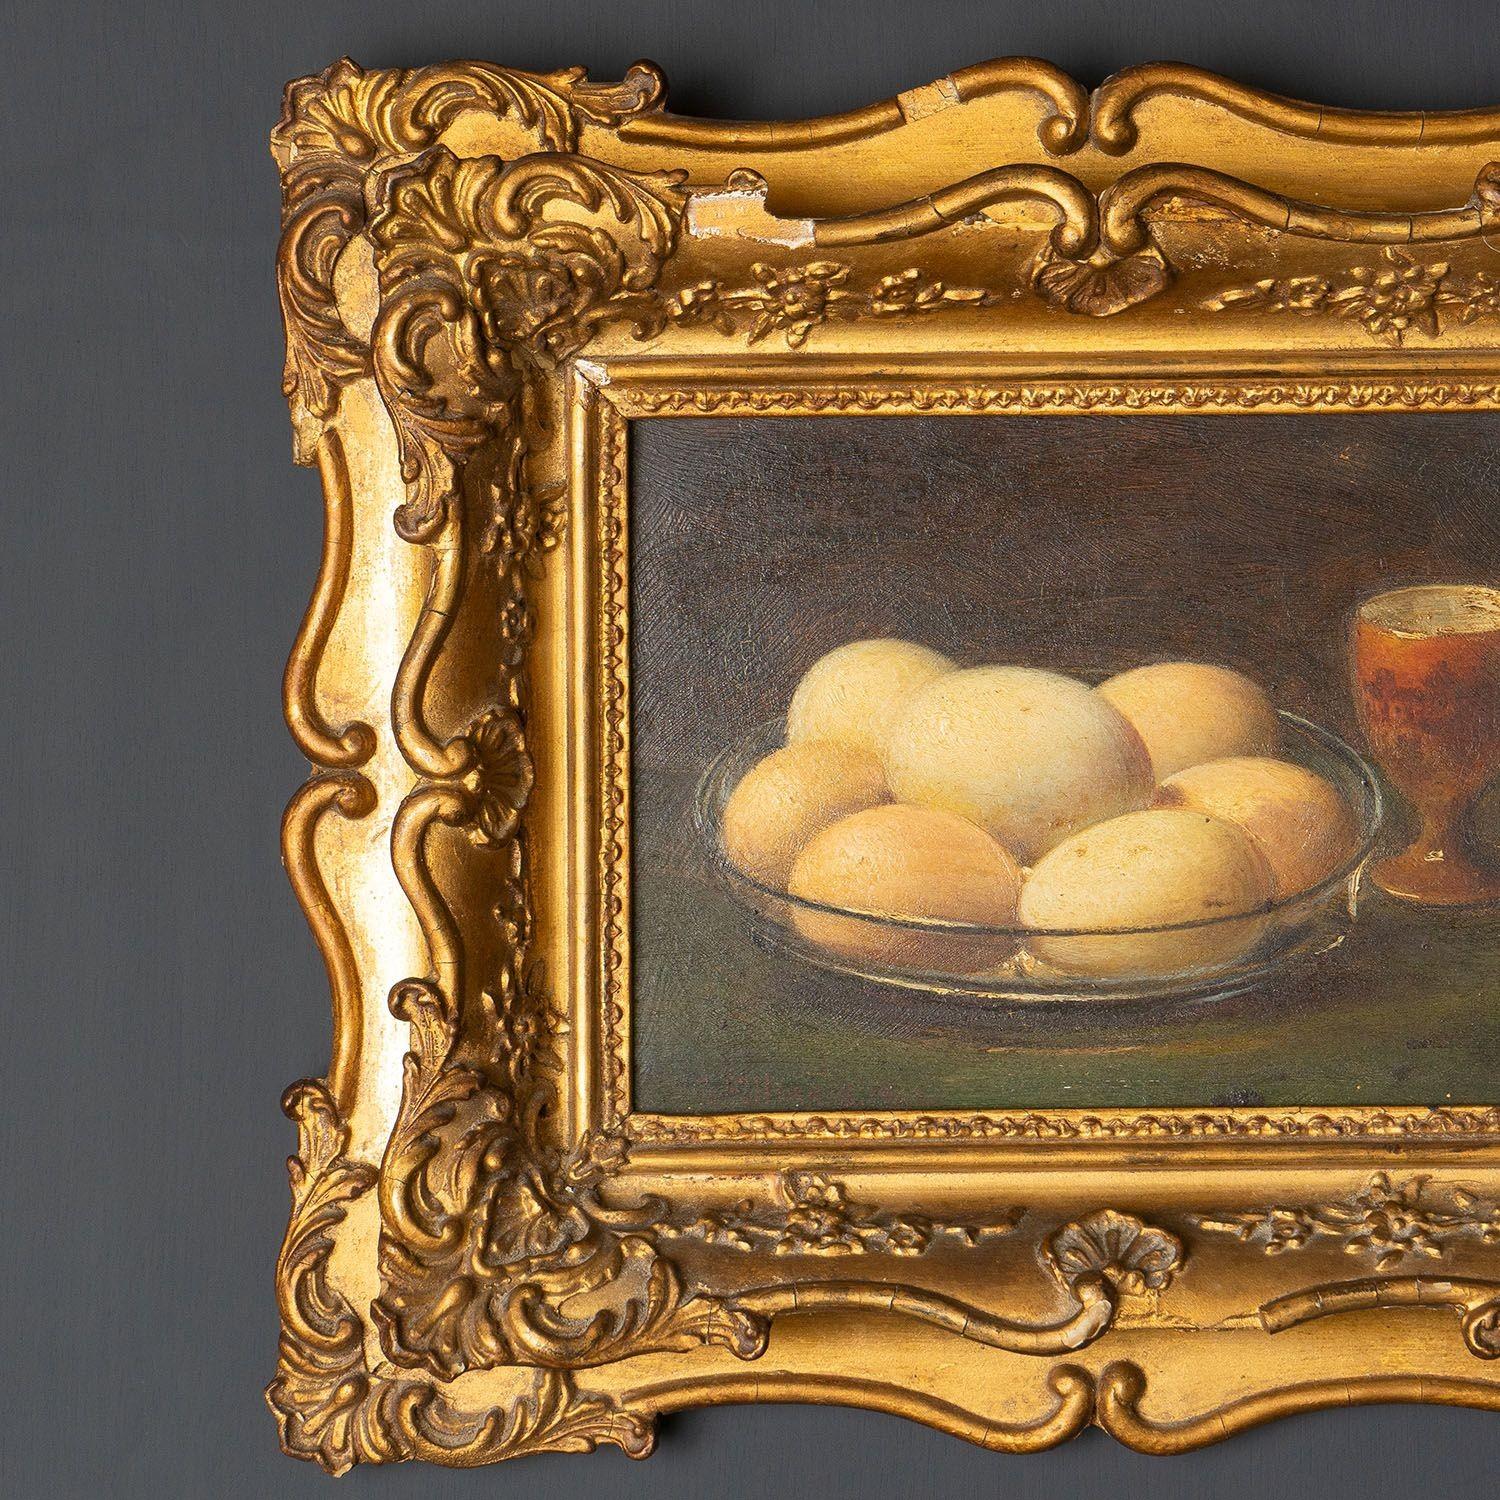 Gesso Pair of Antique Egg Still Life Oil Paintings by George Frederick Harris, 1900s